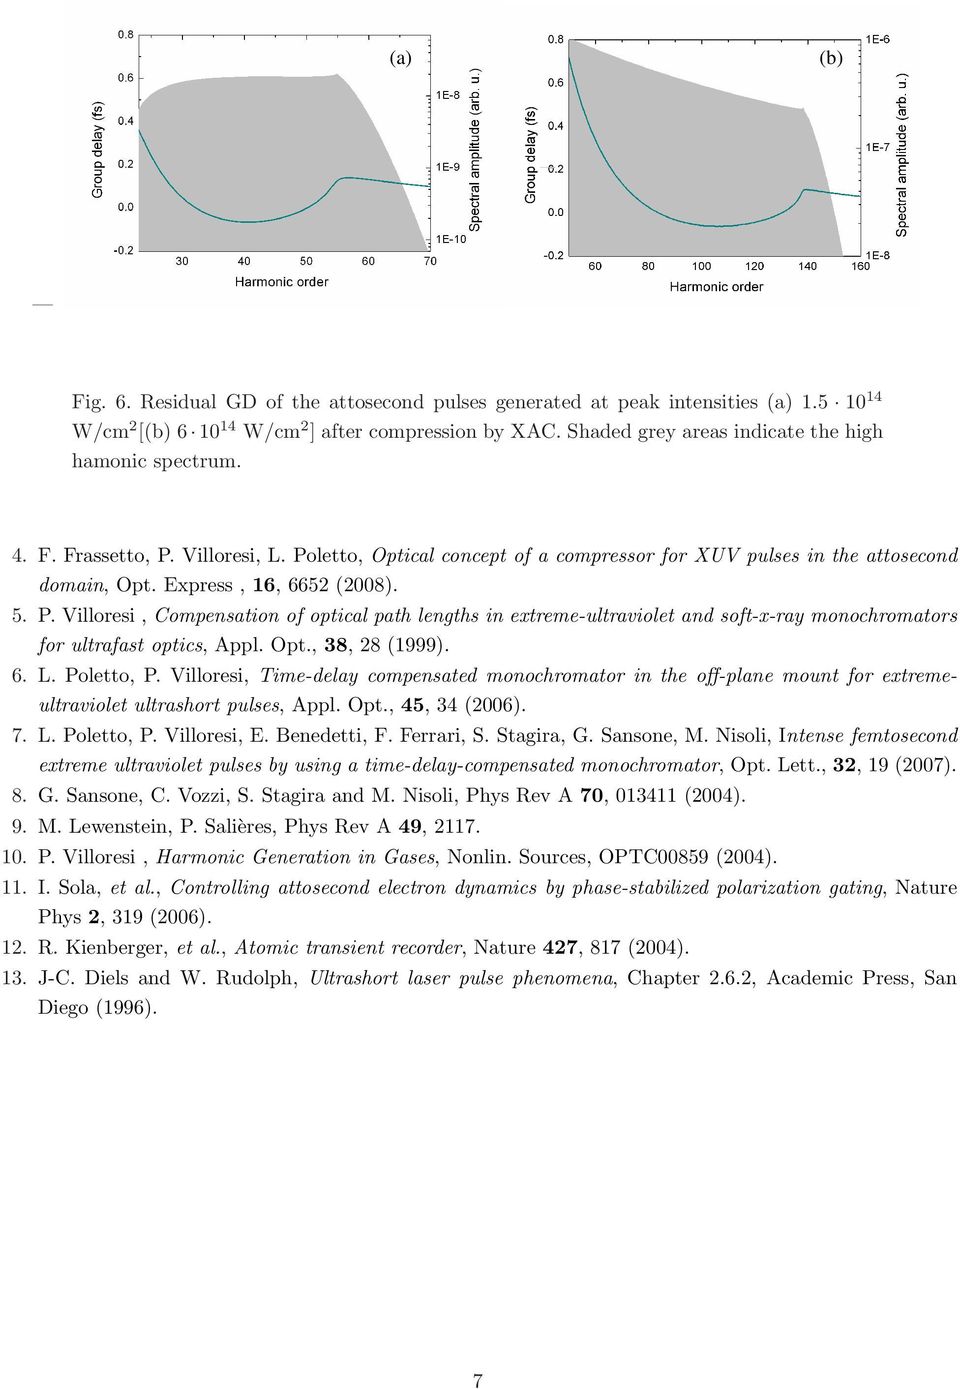 5. P. Villoresi, Compensation of optical path lengths in extreme-ultraviolet and soft-x-ray monochromators for ultrafast optics, Appl. Opt., 38, 8 (1999). 6. L. Poletto, P.